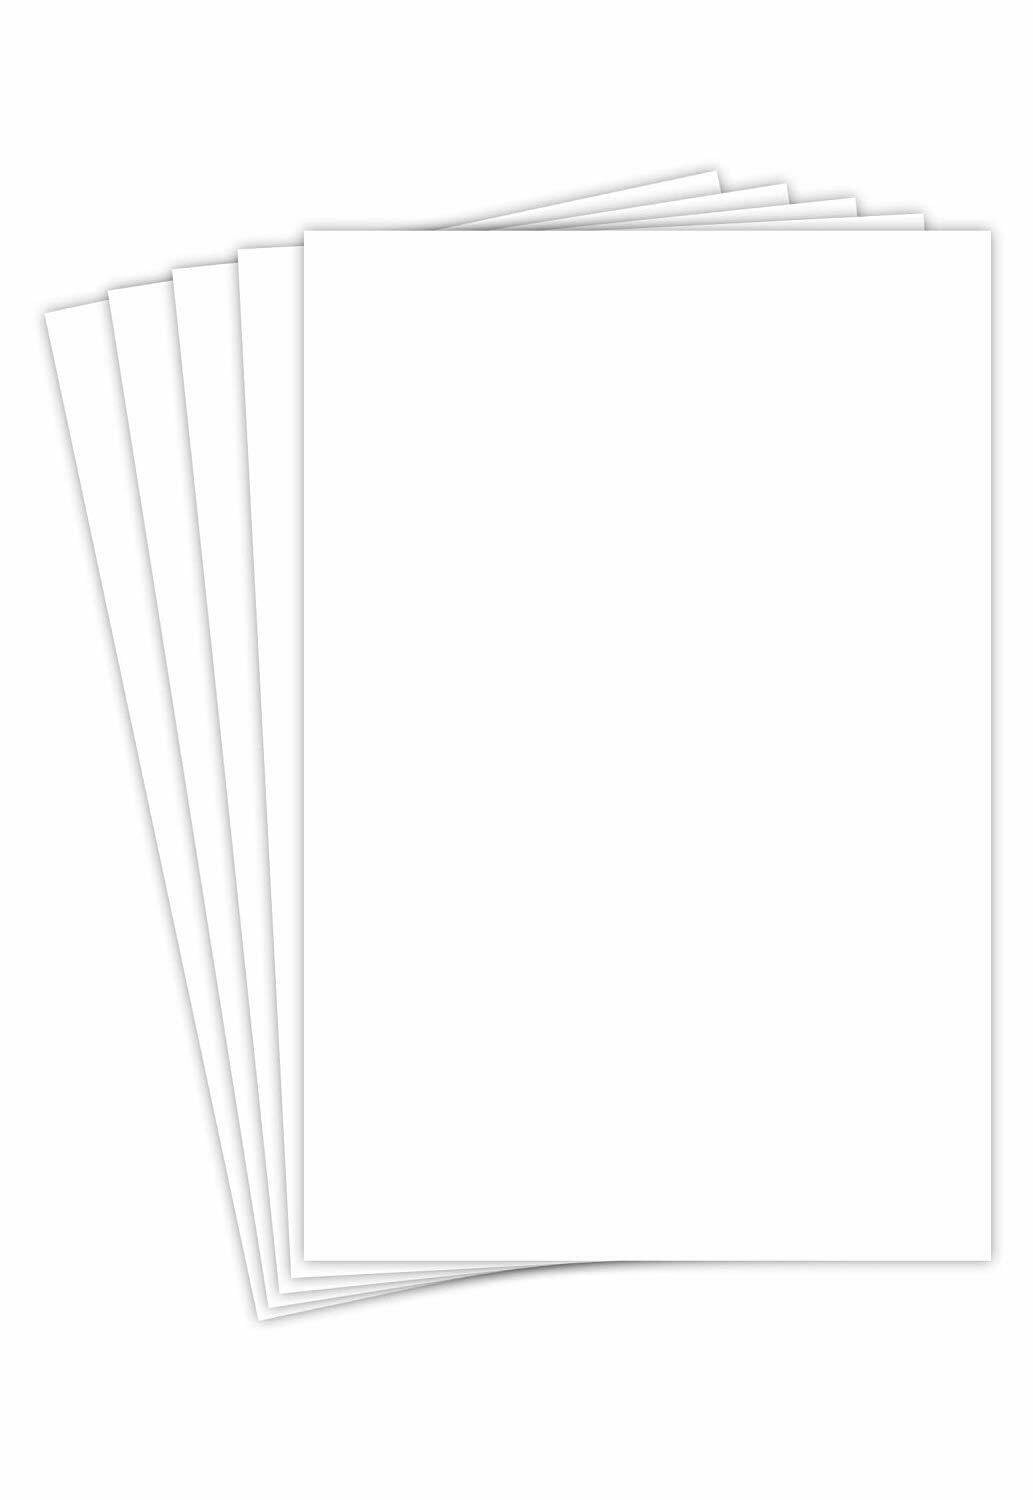 Neenah Bright White Cardstock, 8.5 x 11, 65 lb./176 GSM, 250 Sheets 